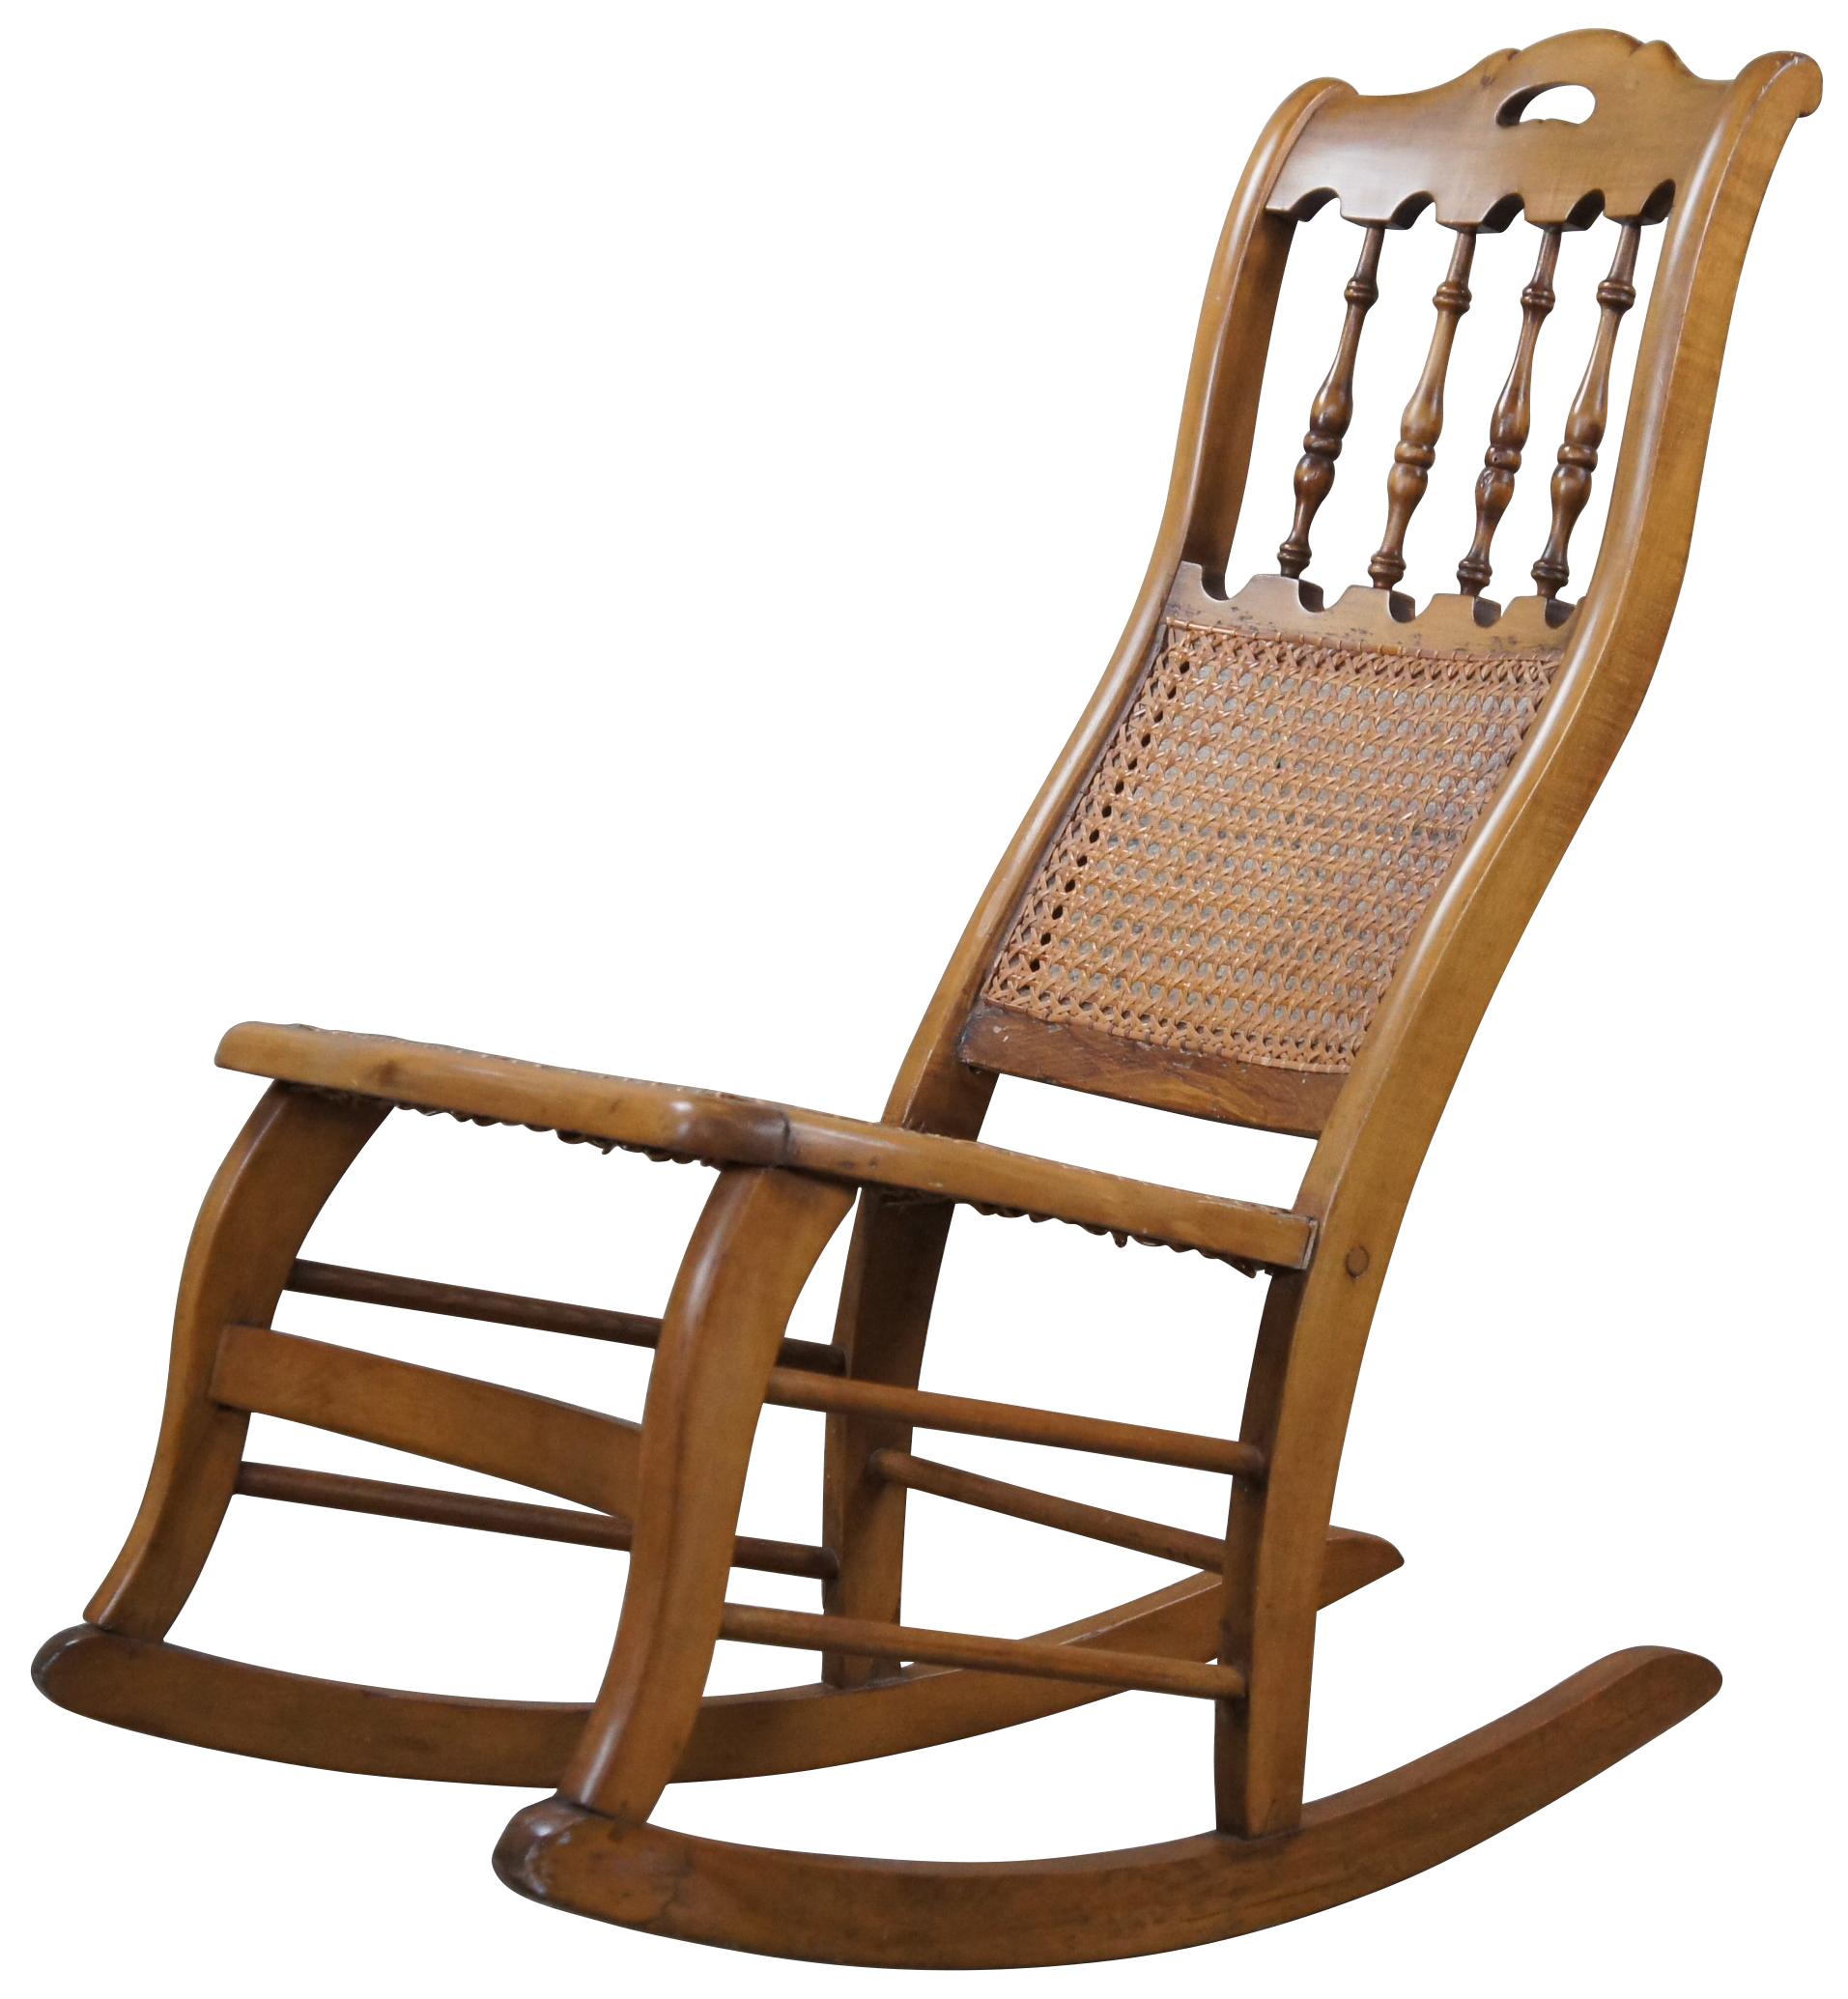 A quaint early American rocking chair, circa 1900s. Made from maple with a spindle back centered between arcade like trim. The chair features a cane seat and back.